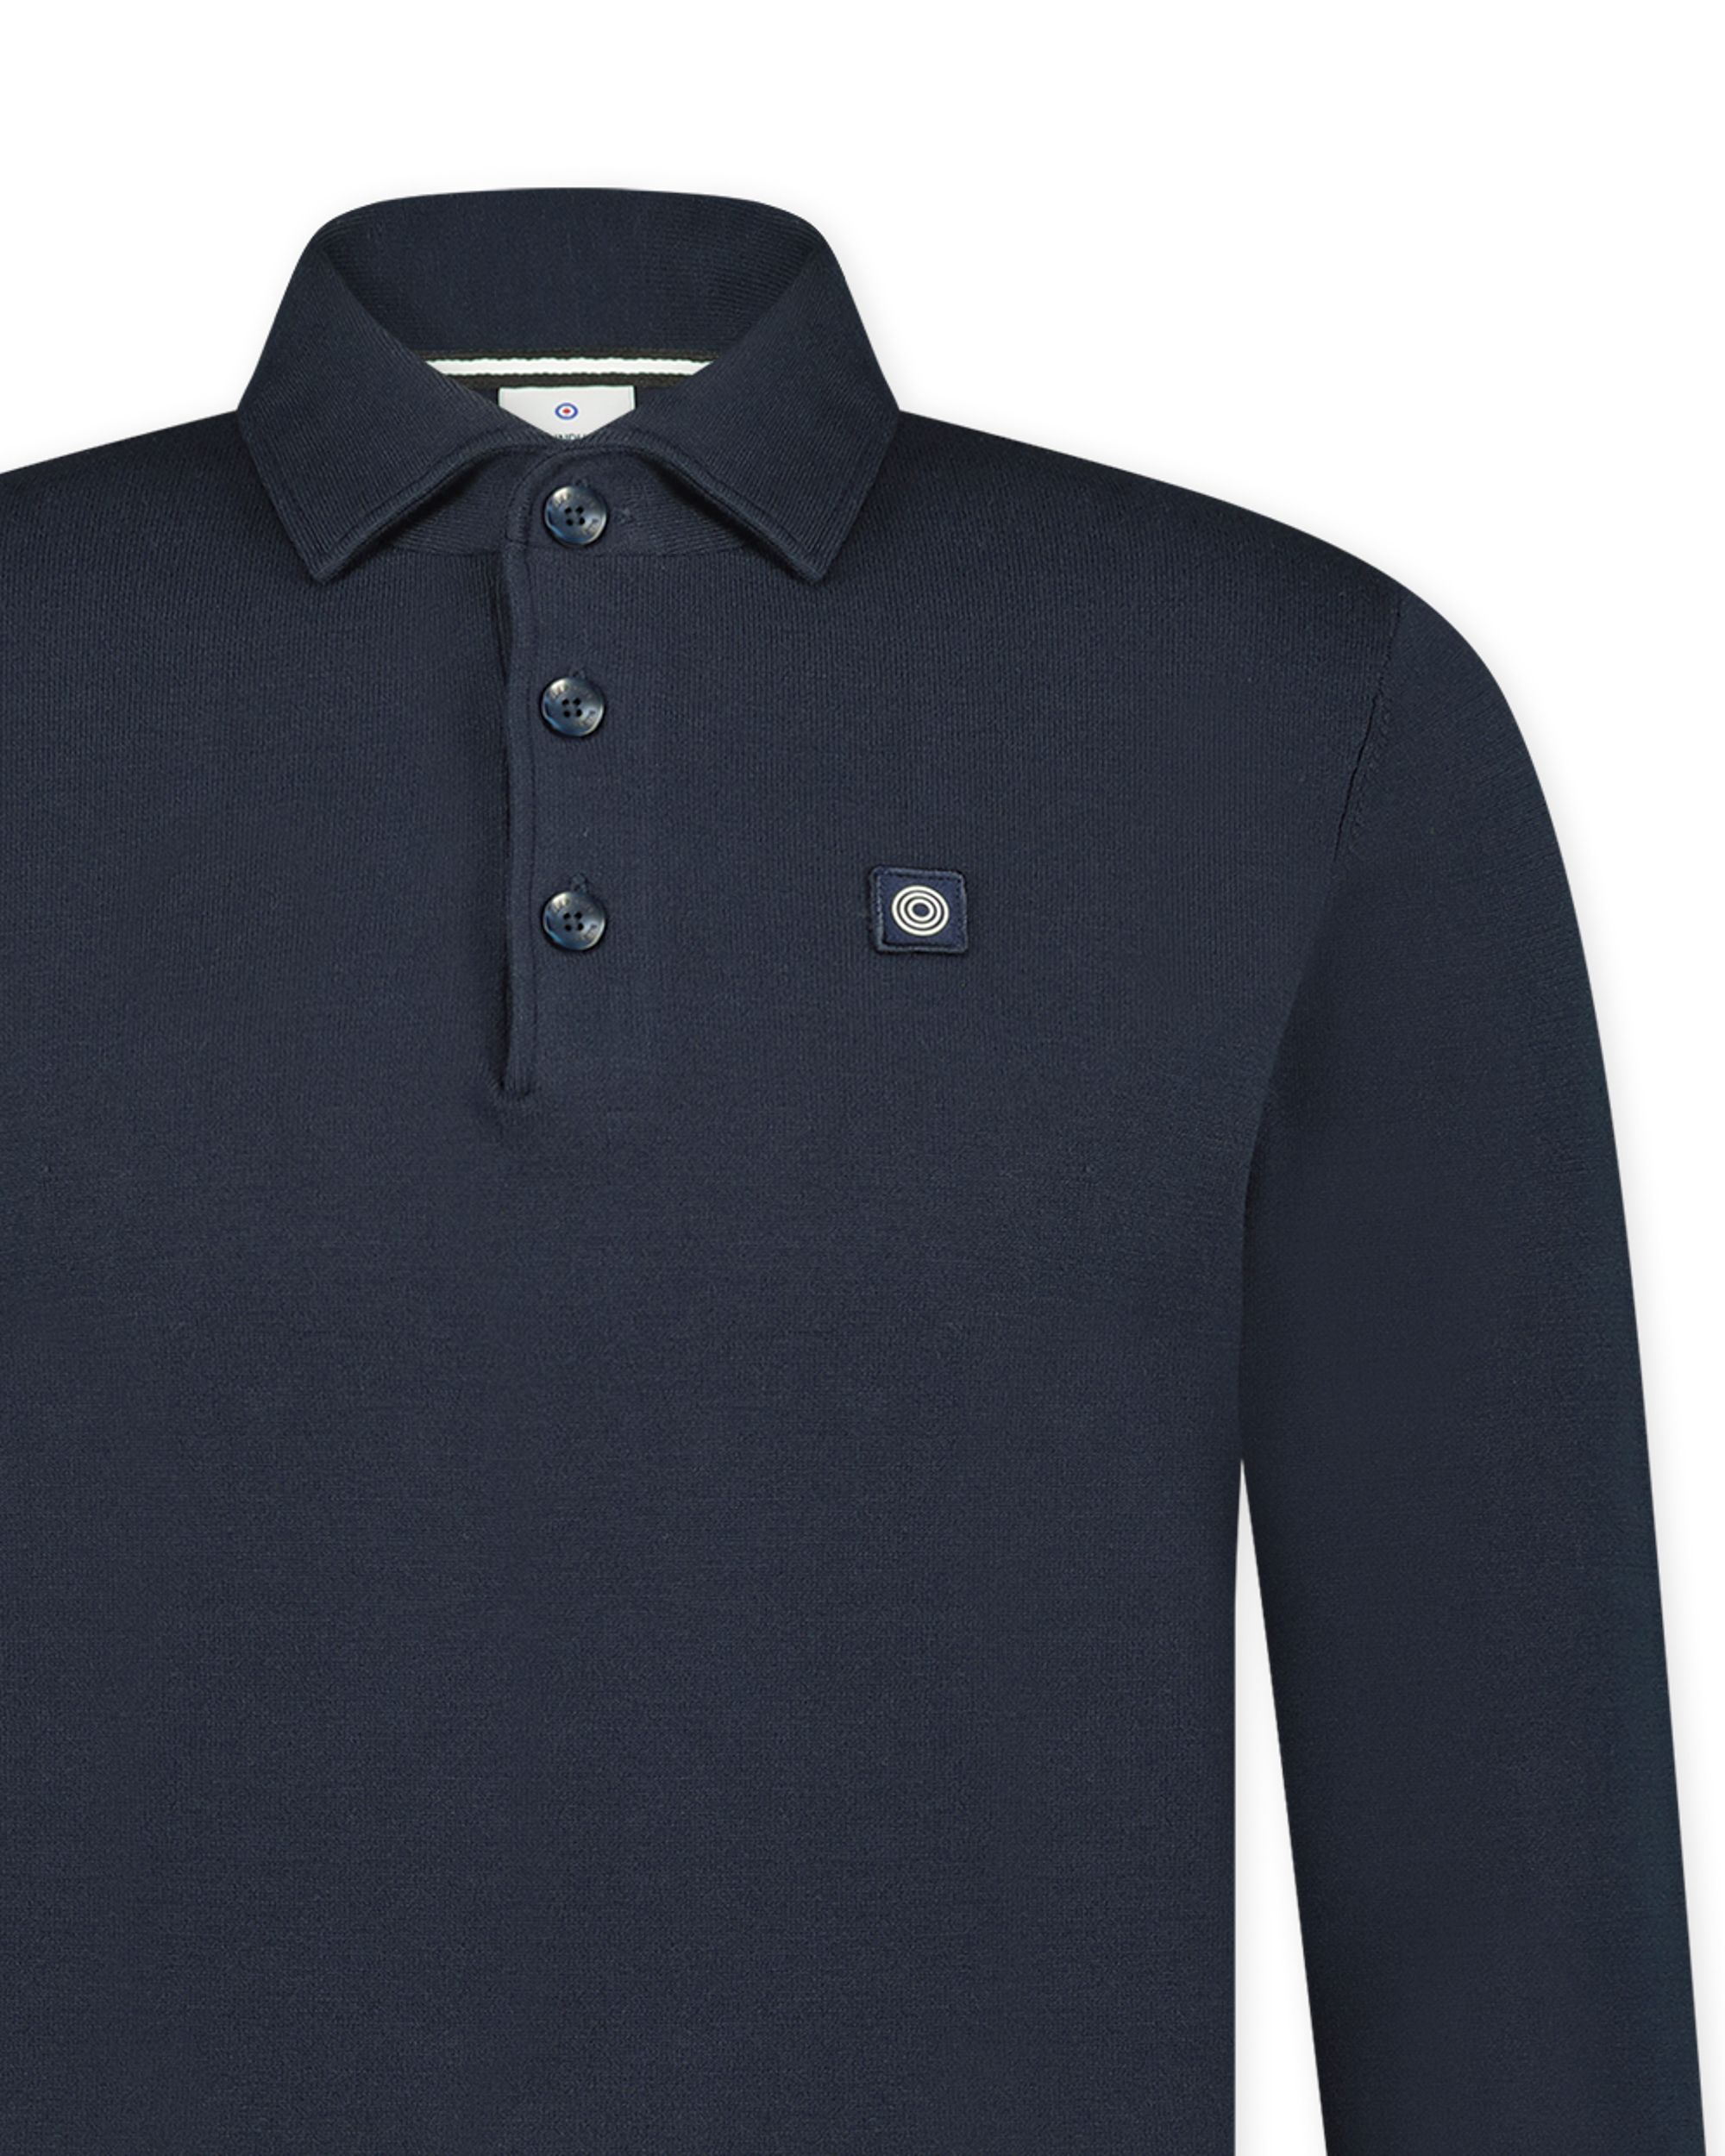 Blue Industry Polo LM Donker blauw 091027-001-L